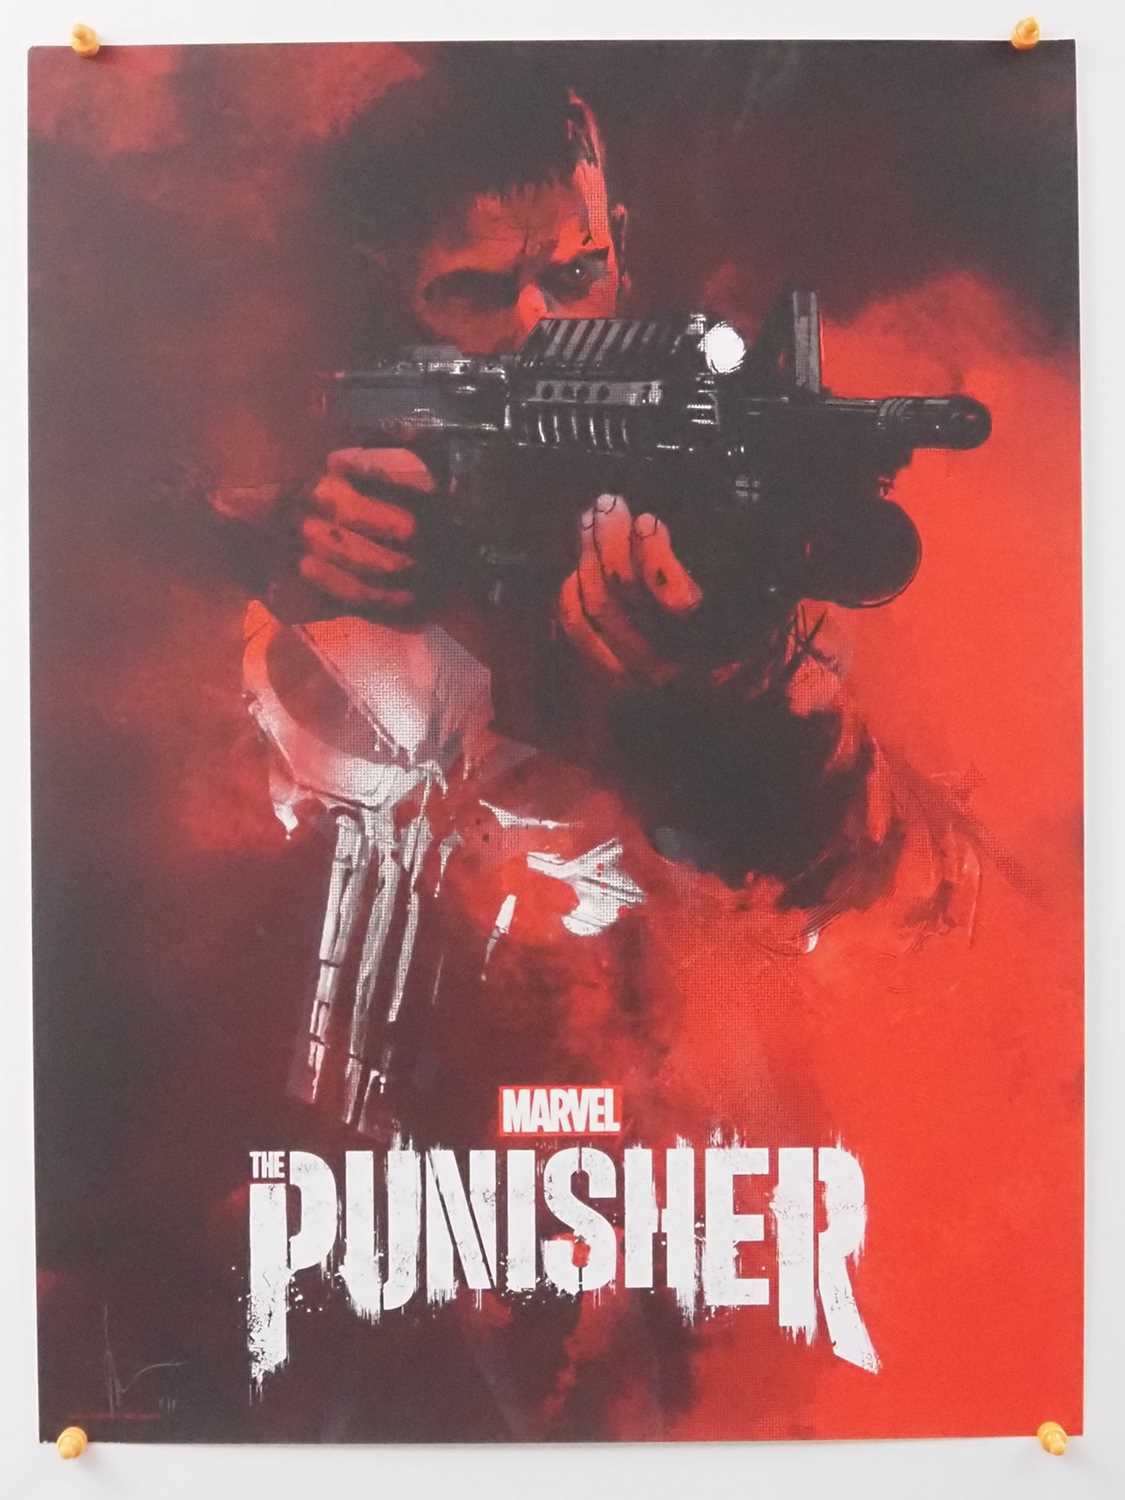 PUNISHER (2017) - Jock - Marvel - Commissioned by Marvel/Netflix to complement the TV series